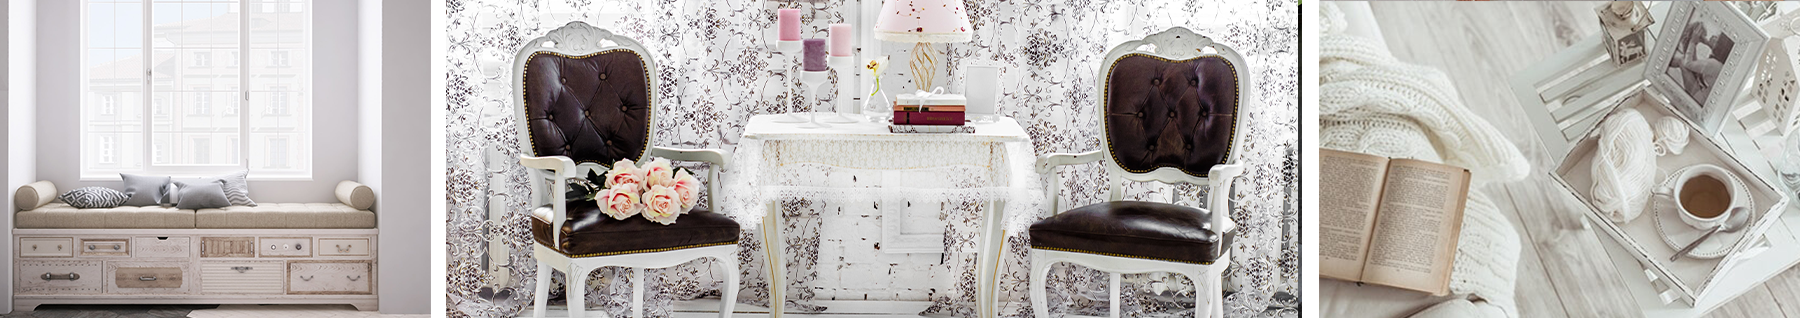 interieur design style shabby chic